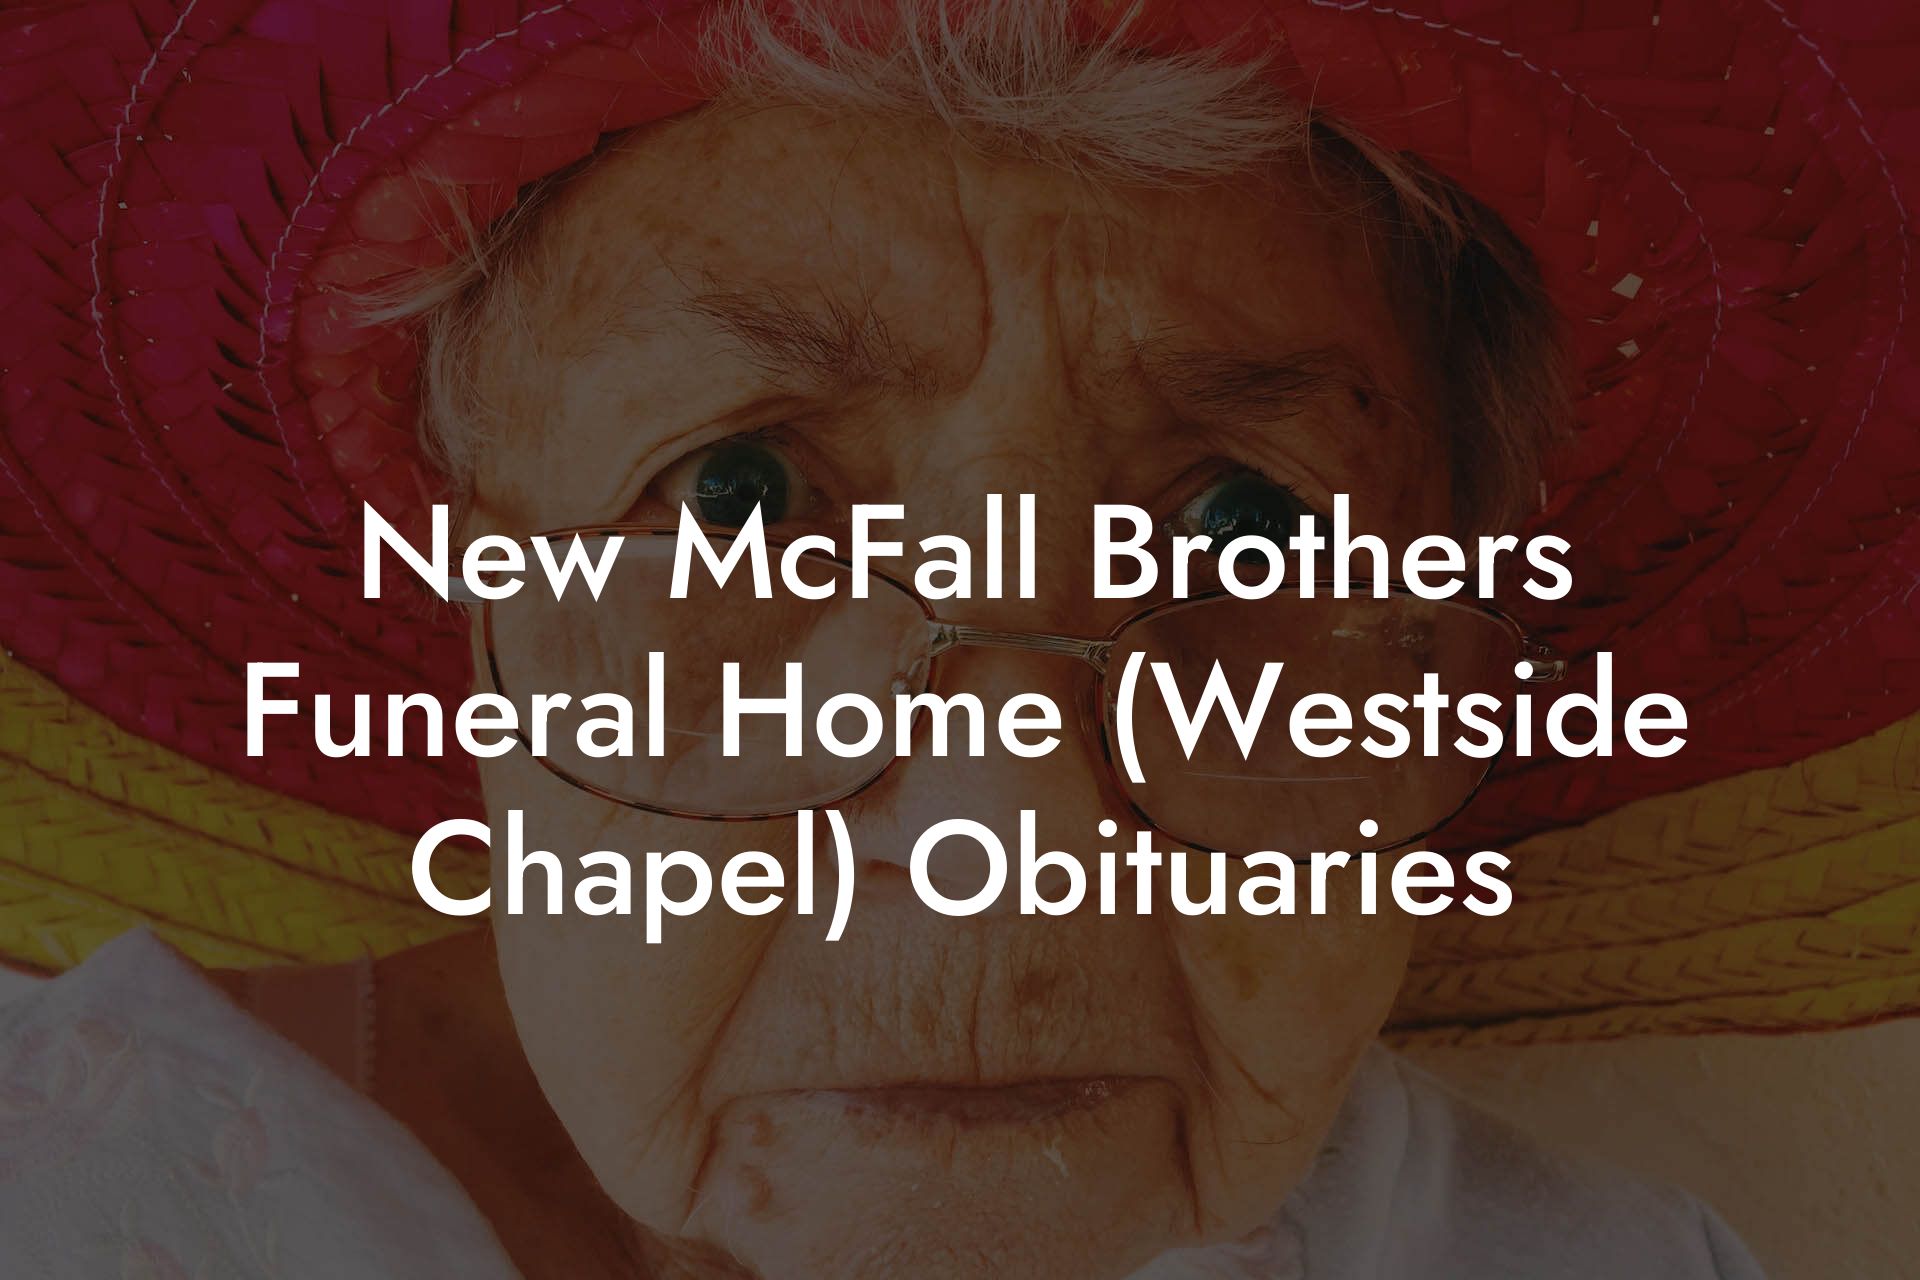 New McFall Brothers Funeral Home (Westside Chapel) Obituaries